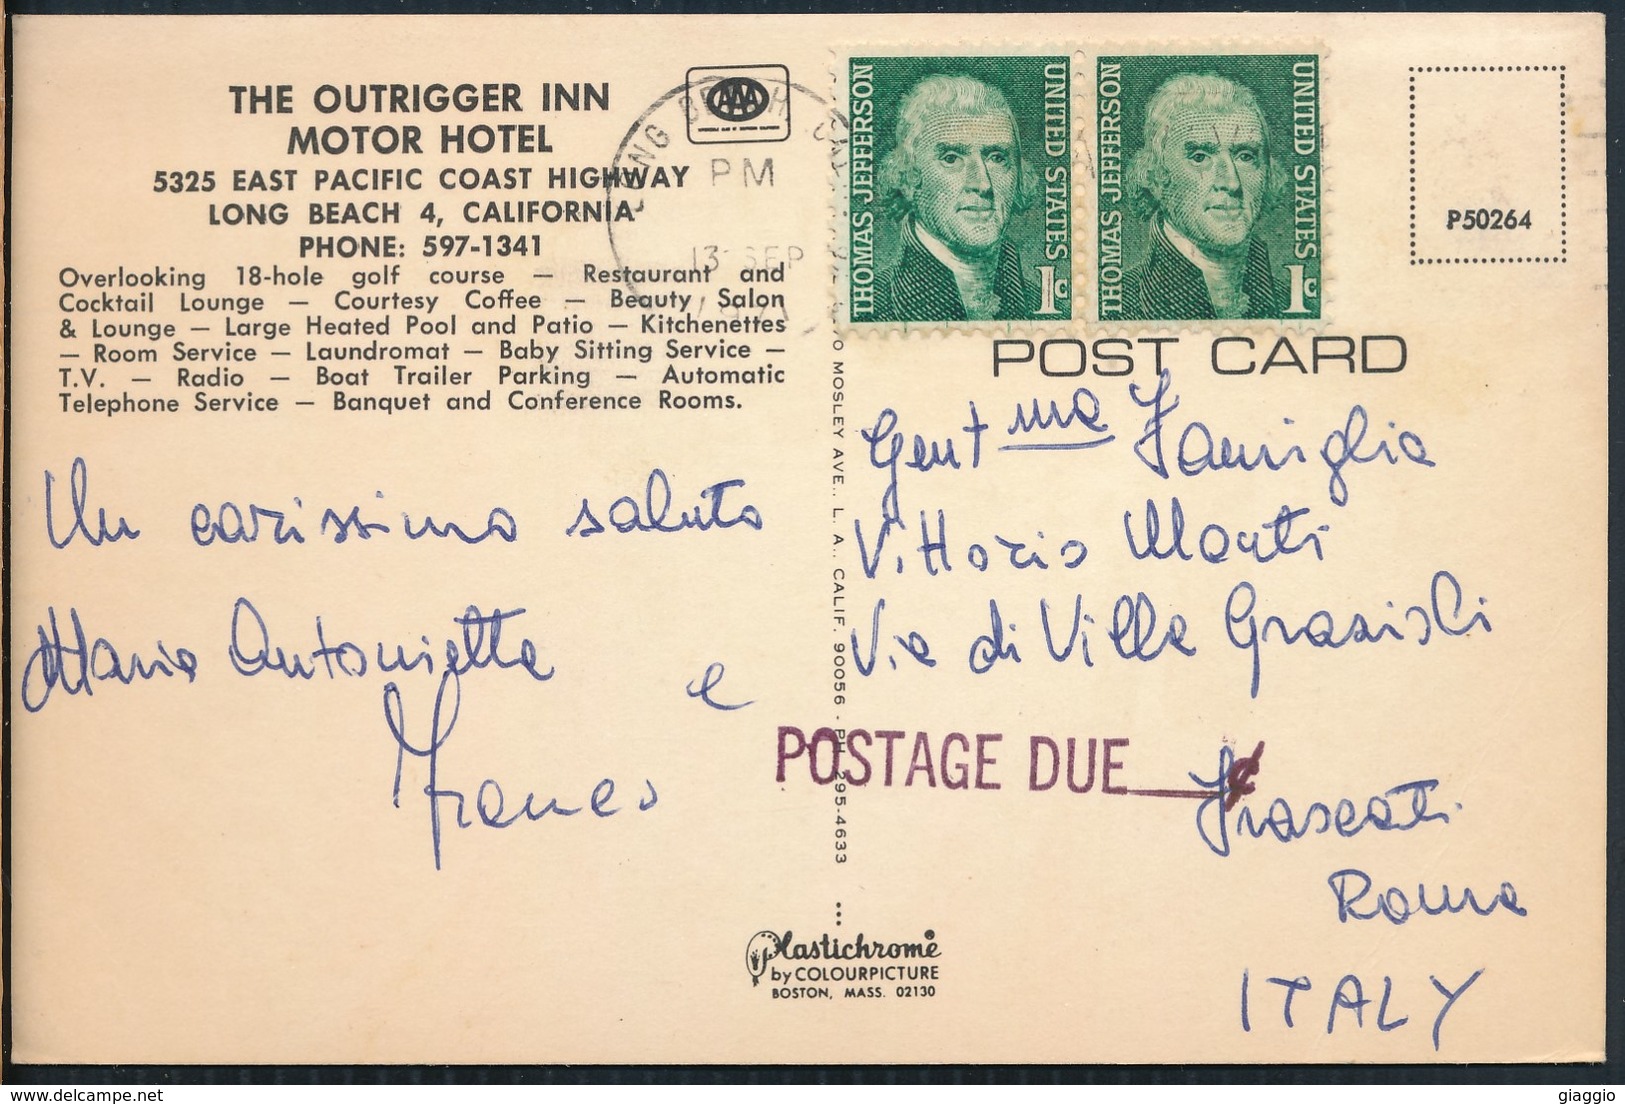 °°° 19713 - USA - CA - LONG BEACH - THE OUTRIGGER INN MOTOR HOTEL - 1971 With Stamps °°° - Long Beach